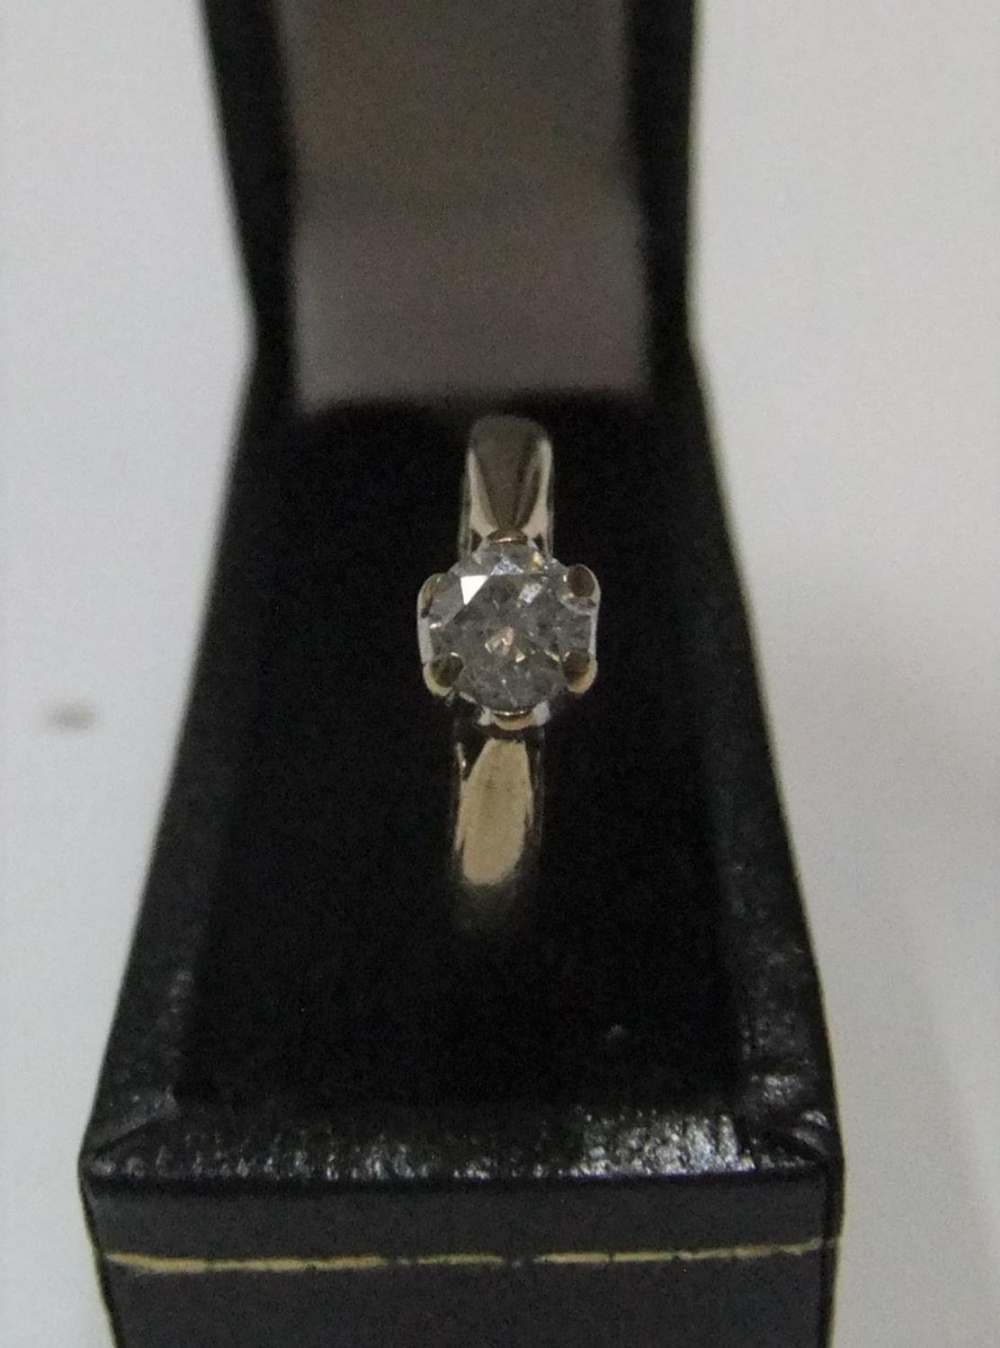 9ct yellow gold diamond solitaire ring (approx 0.25ct) Approx 2.1 grams gross, size K/L - Image 2 of 3